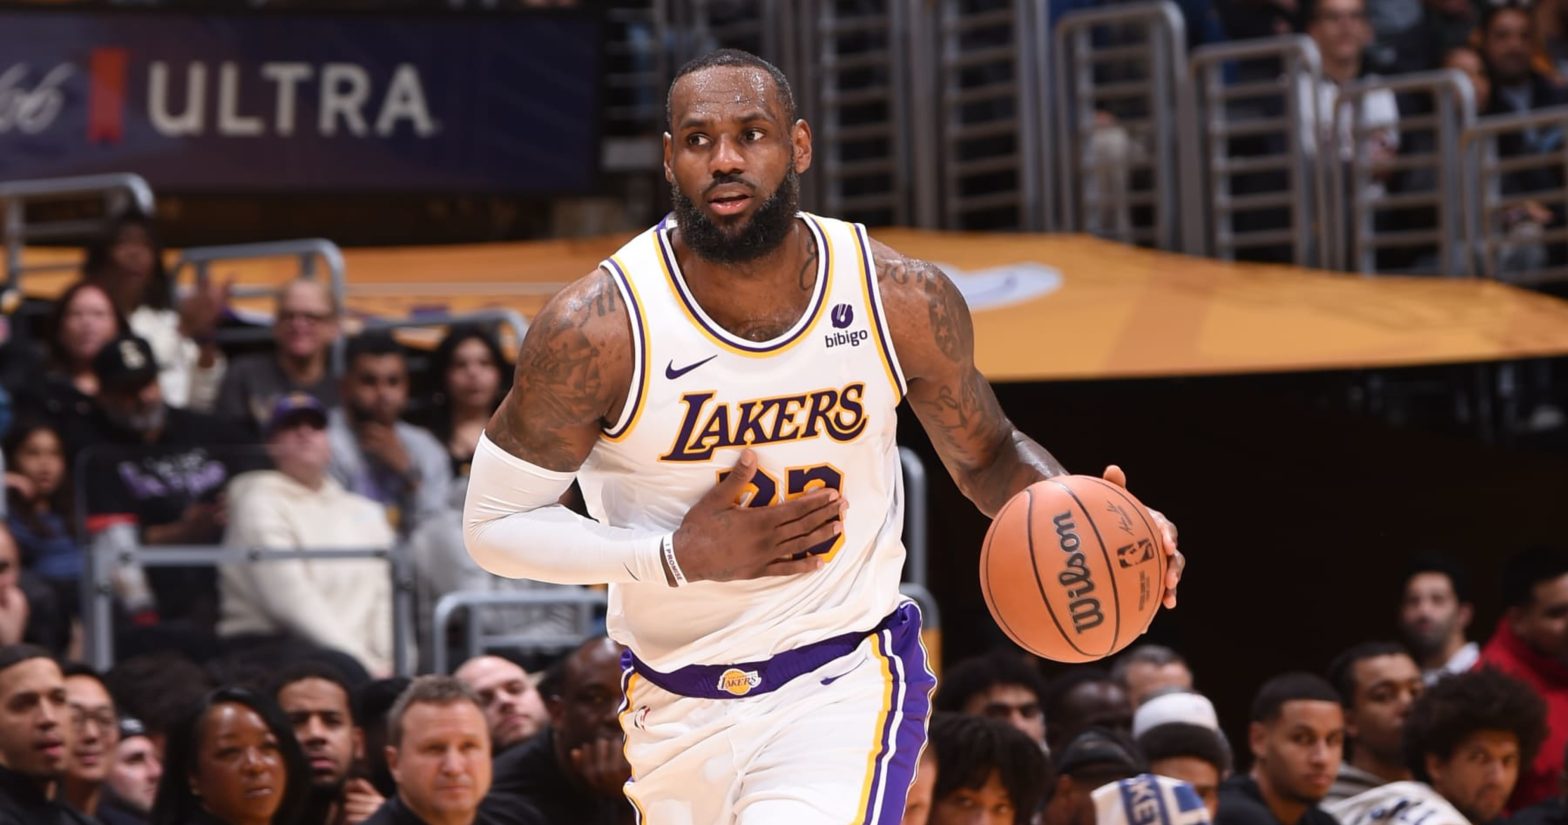 Lakers’ LeBron James, D’Angelo Russell Thrill NBA Fans in Win Over Trail Blazers